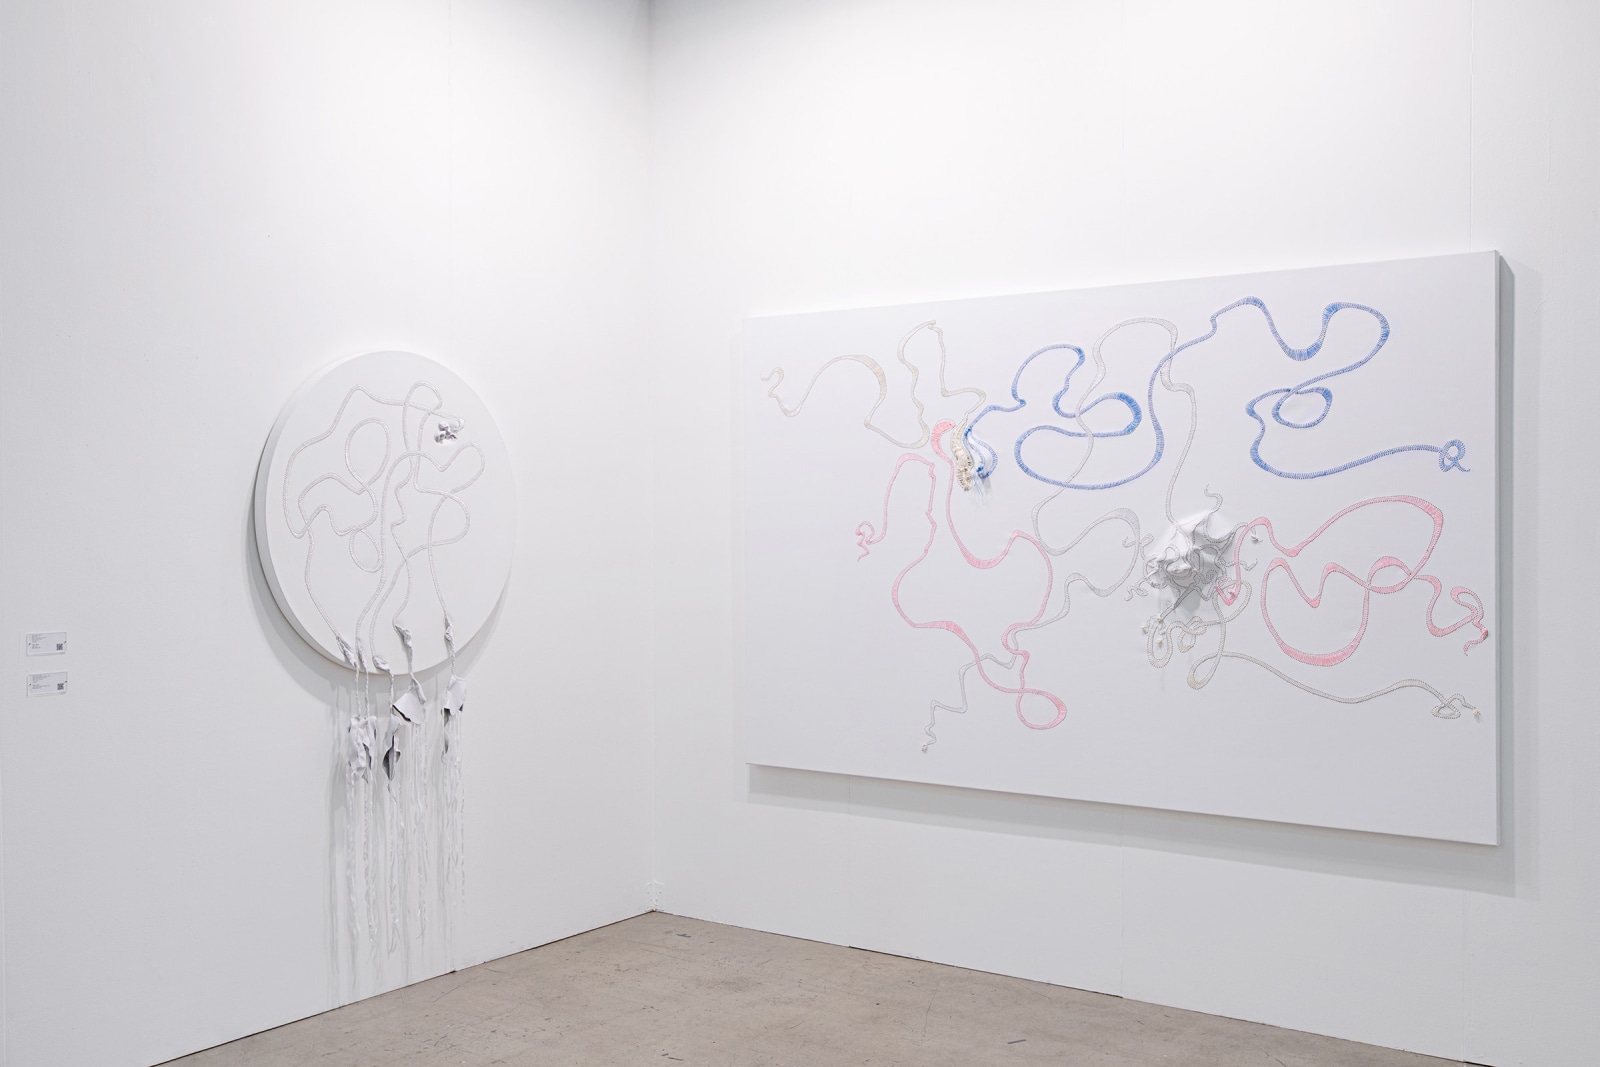 Eighth installation view of Lehmann Maupin's booth at Art Busan &amp; design 2020